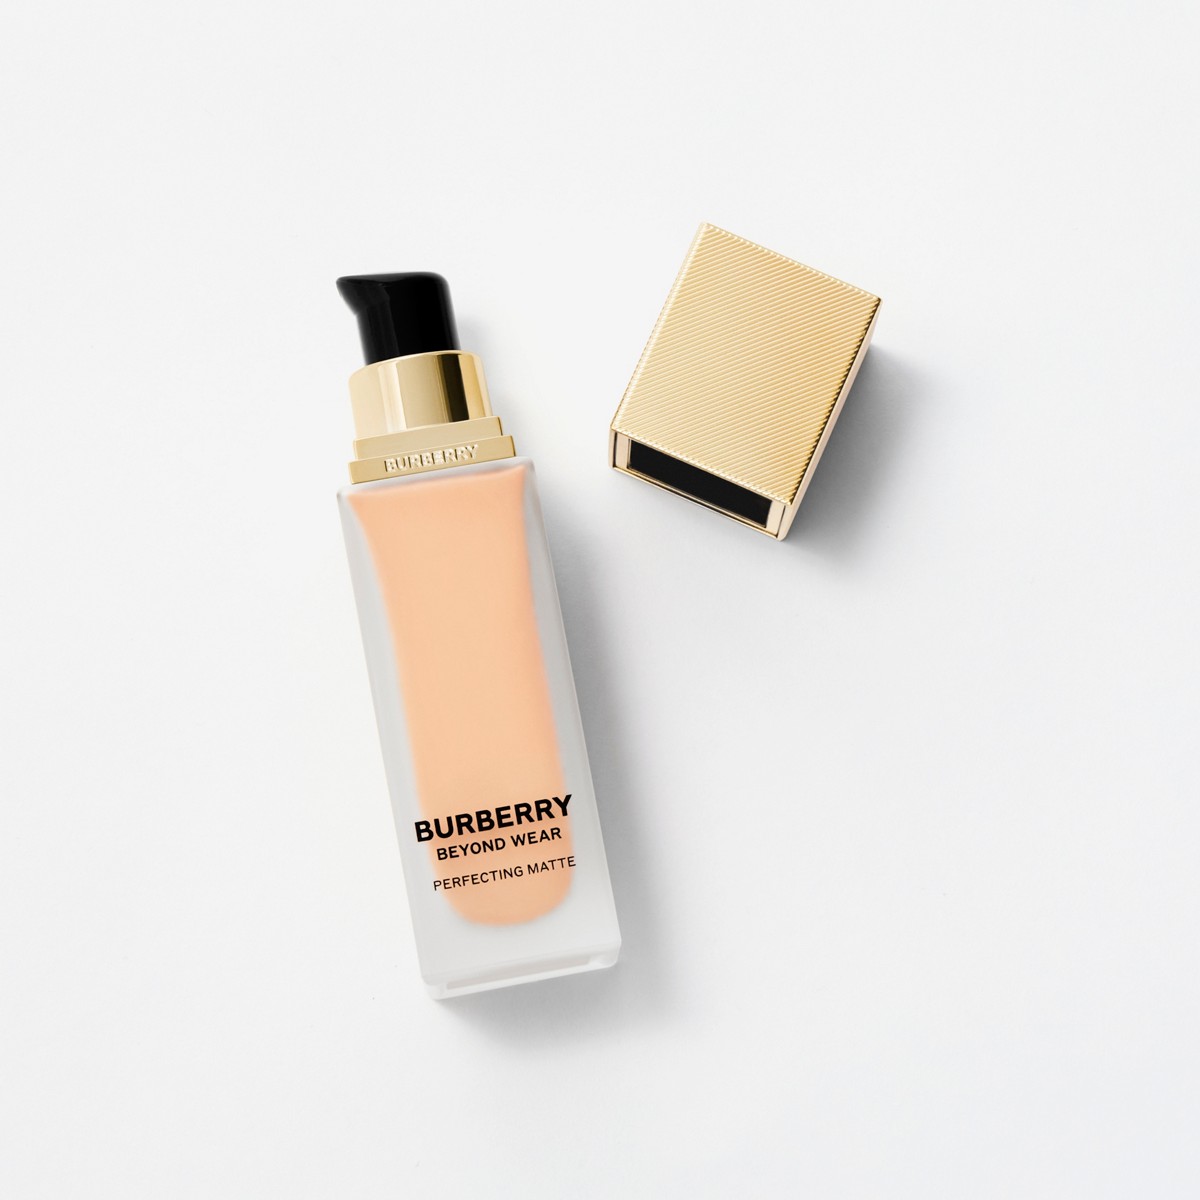 Burberry Beyond Wear Perfecting Matte Foundation - 20 Fair Cool In Neutral